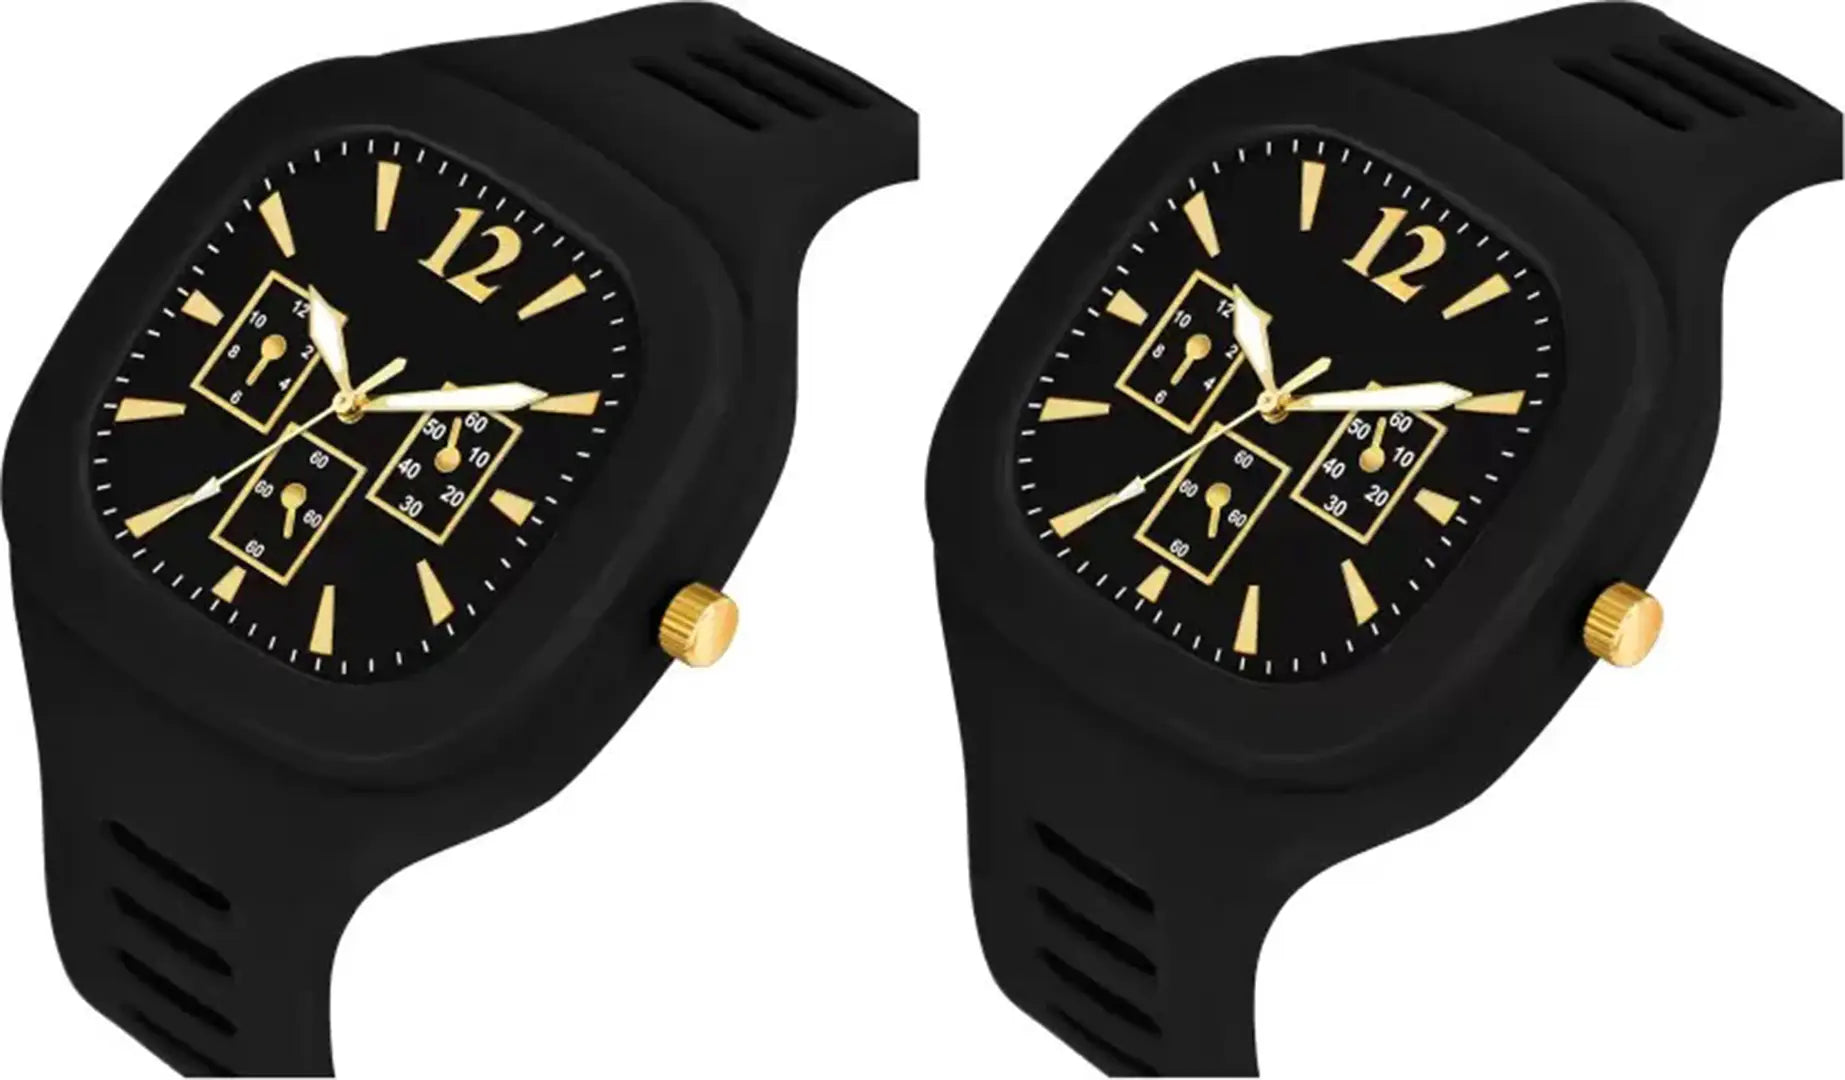 Stylish Black Silicone Analog Watches For Men Pack Of 2